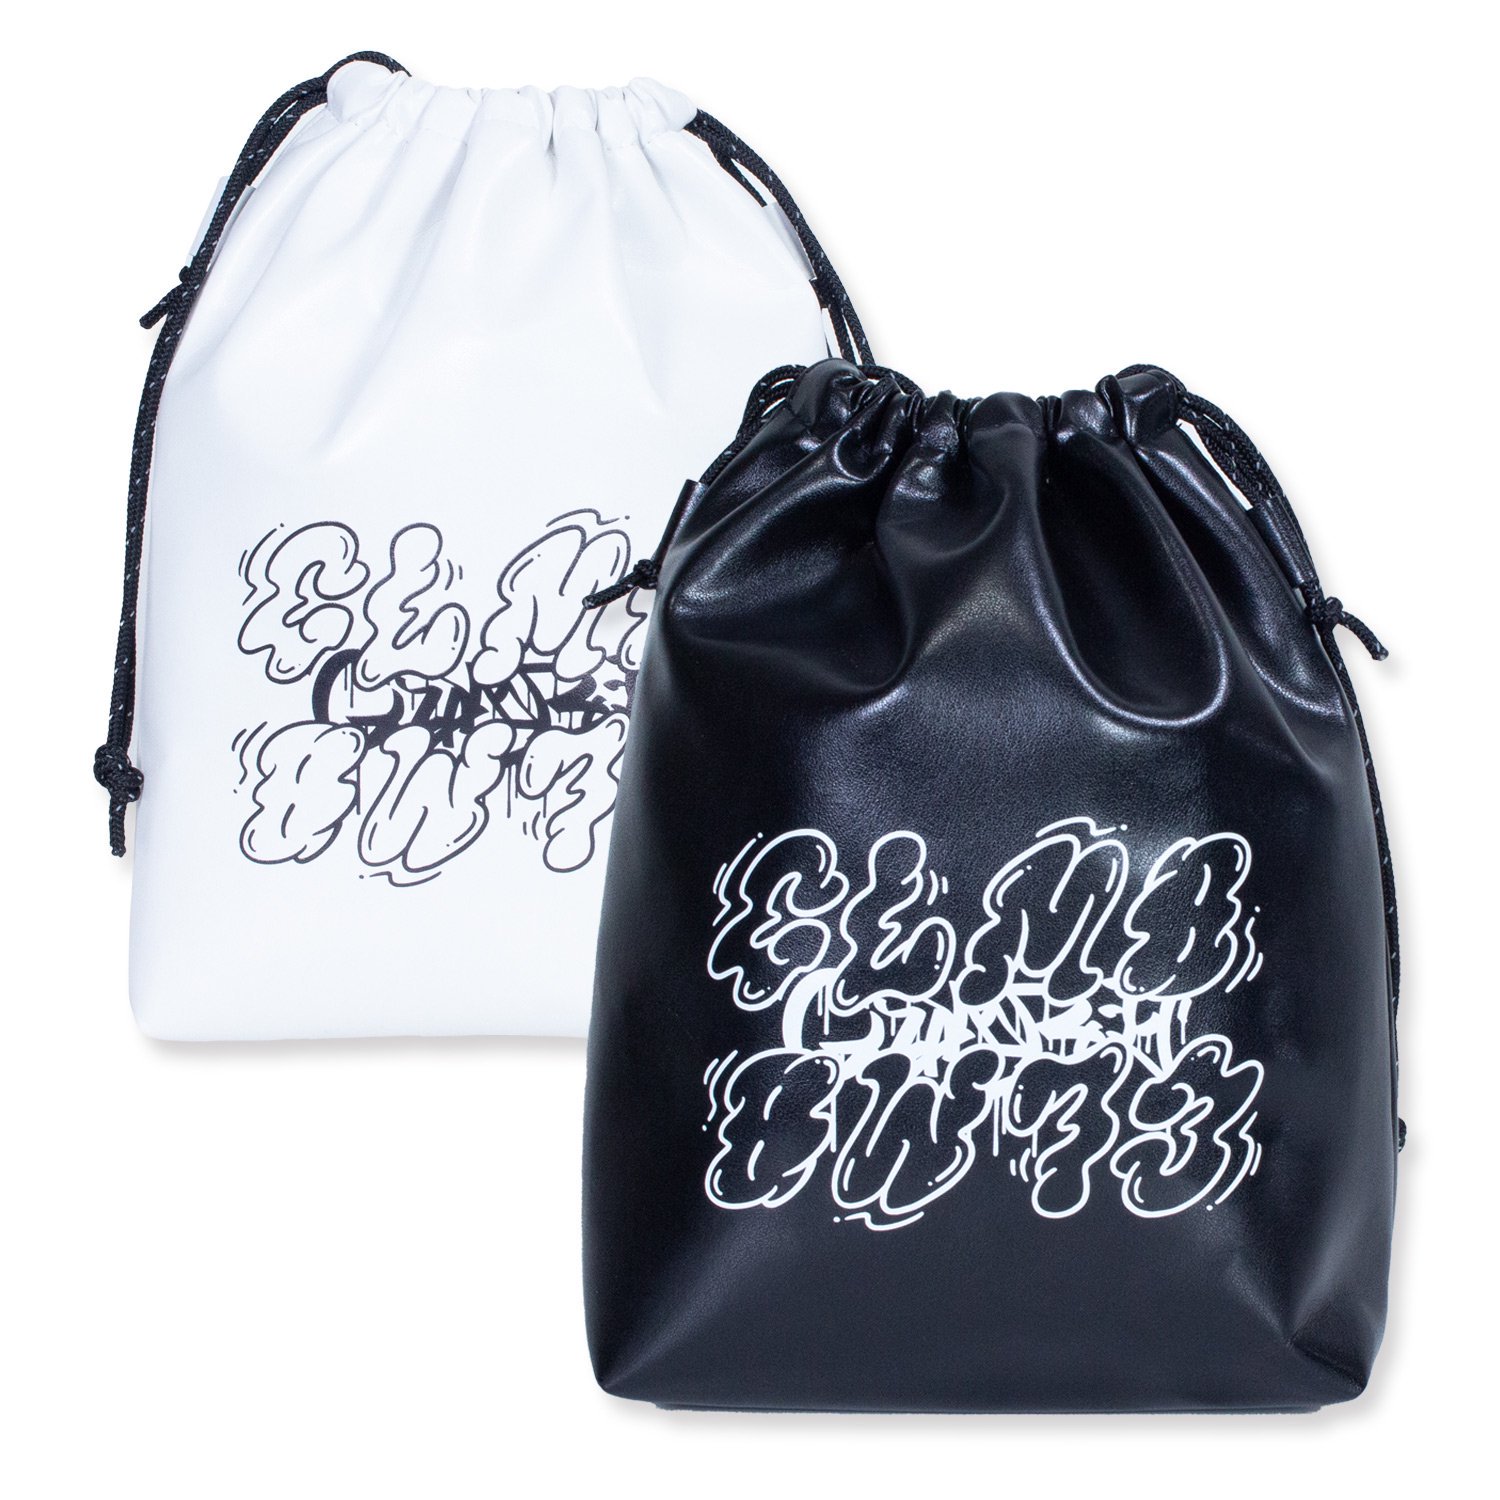 <img class='new_mark_img1' src='https://img.shop-pro.jp/img/new/icons8.gif' style='border:none;display:inline;margin:0px;padding:0px;width:auto;' />2WAY DRAWSTRING BAG